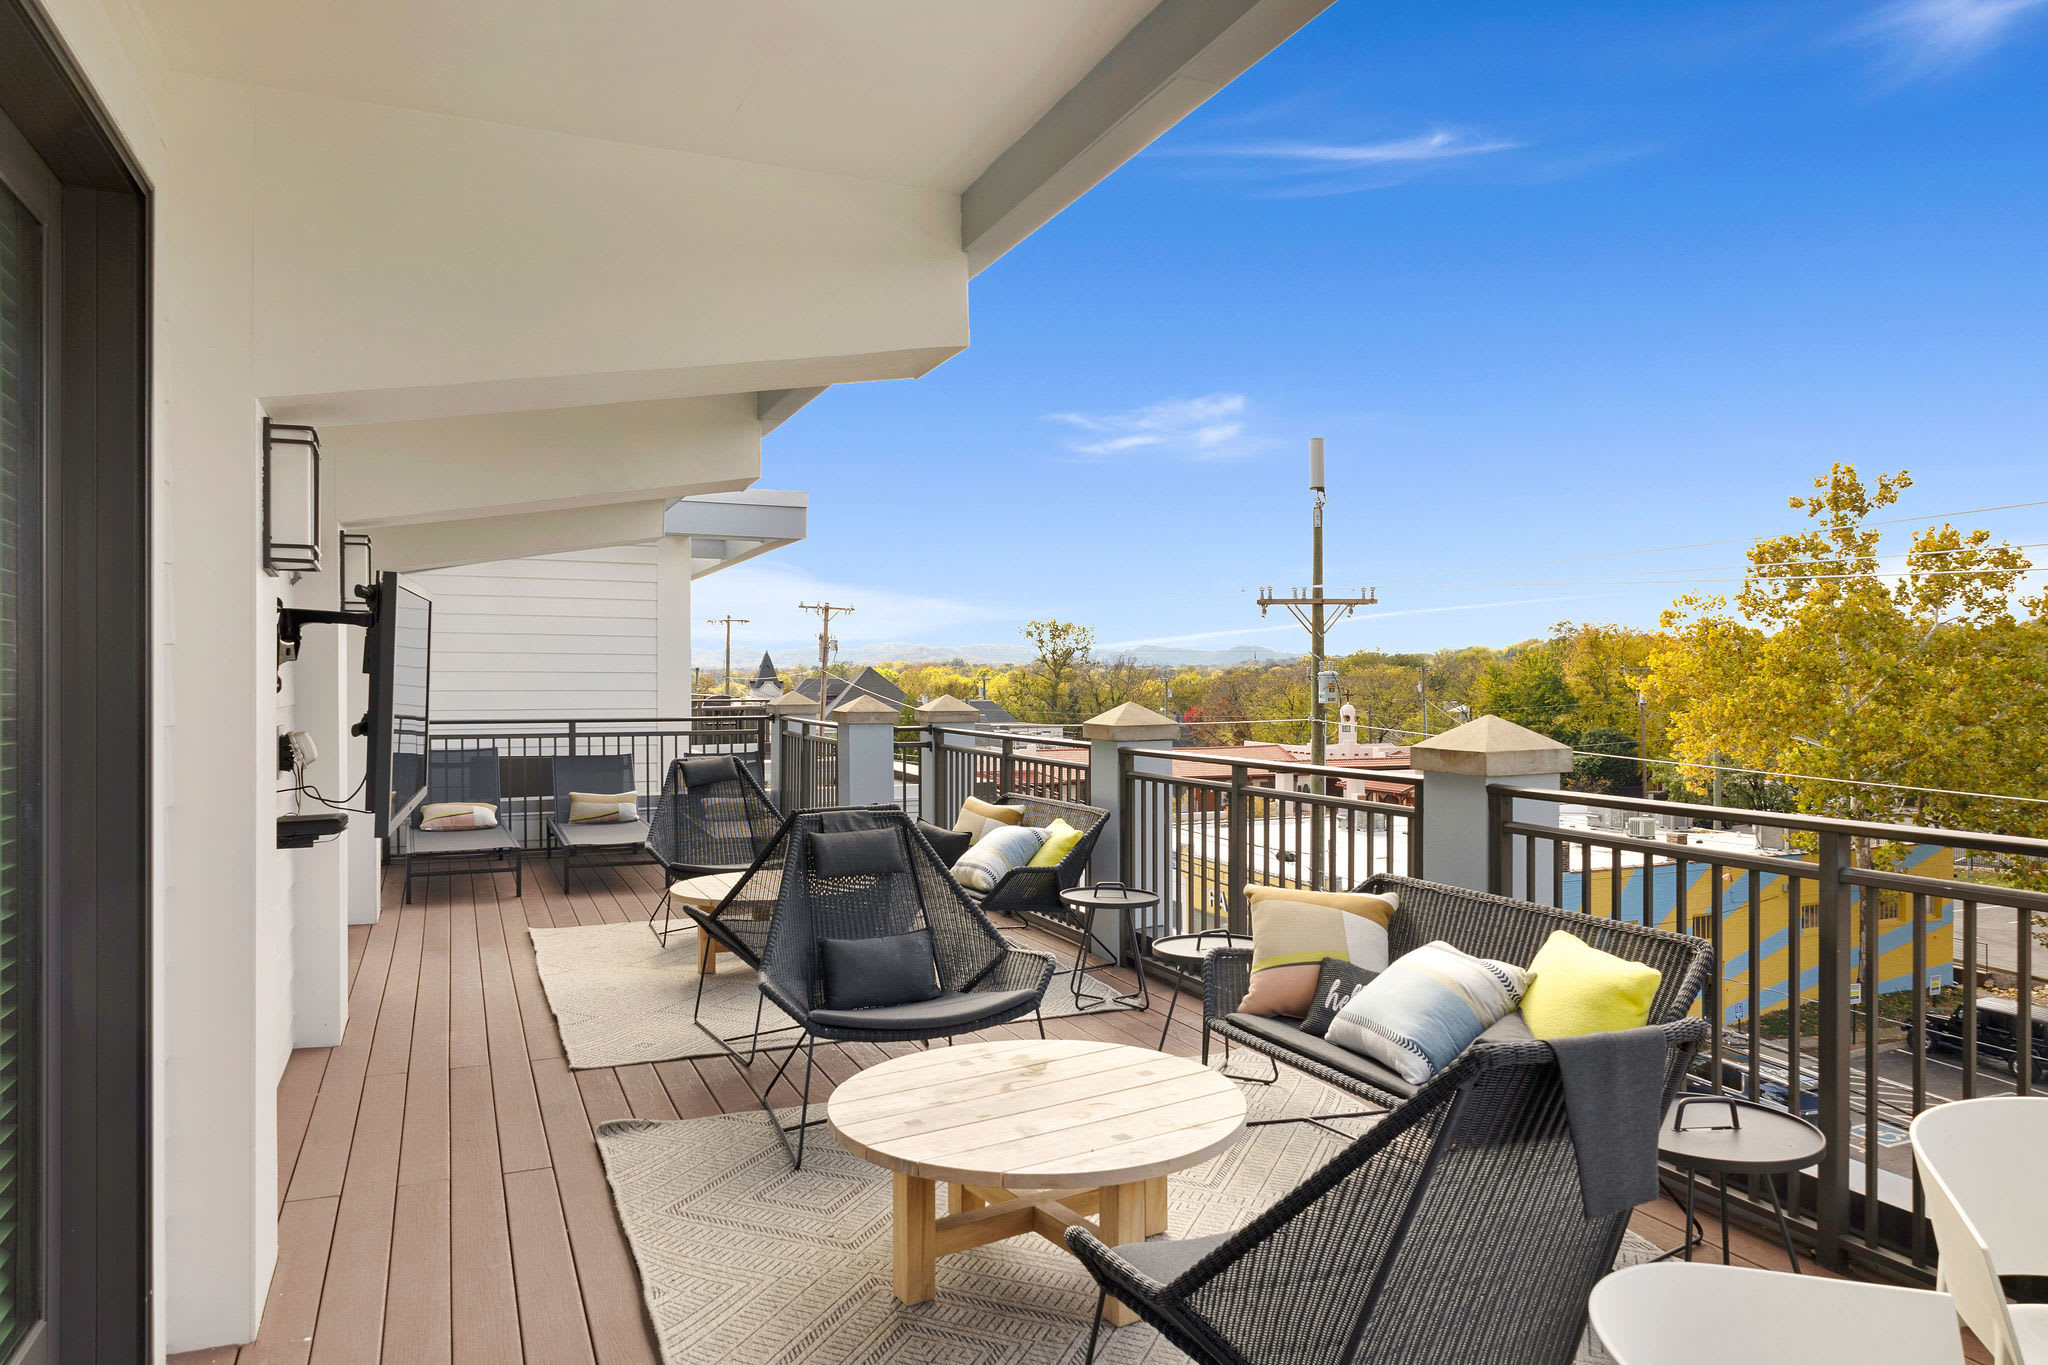 Outdoor community space with a view at 12 South Apartments in Nashville, Tennessee